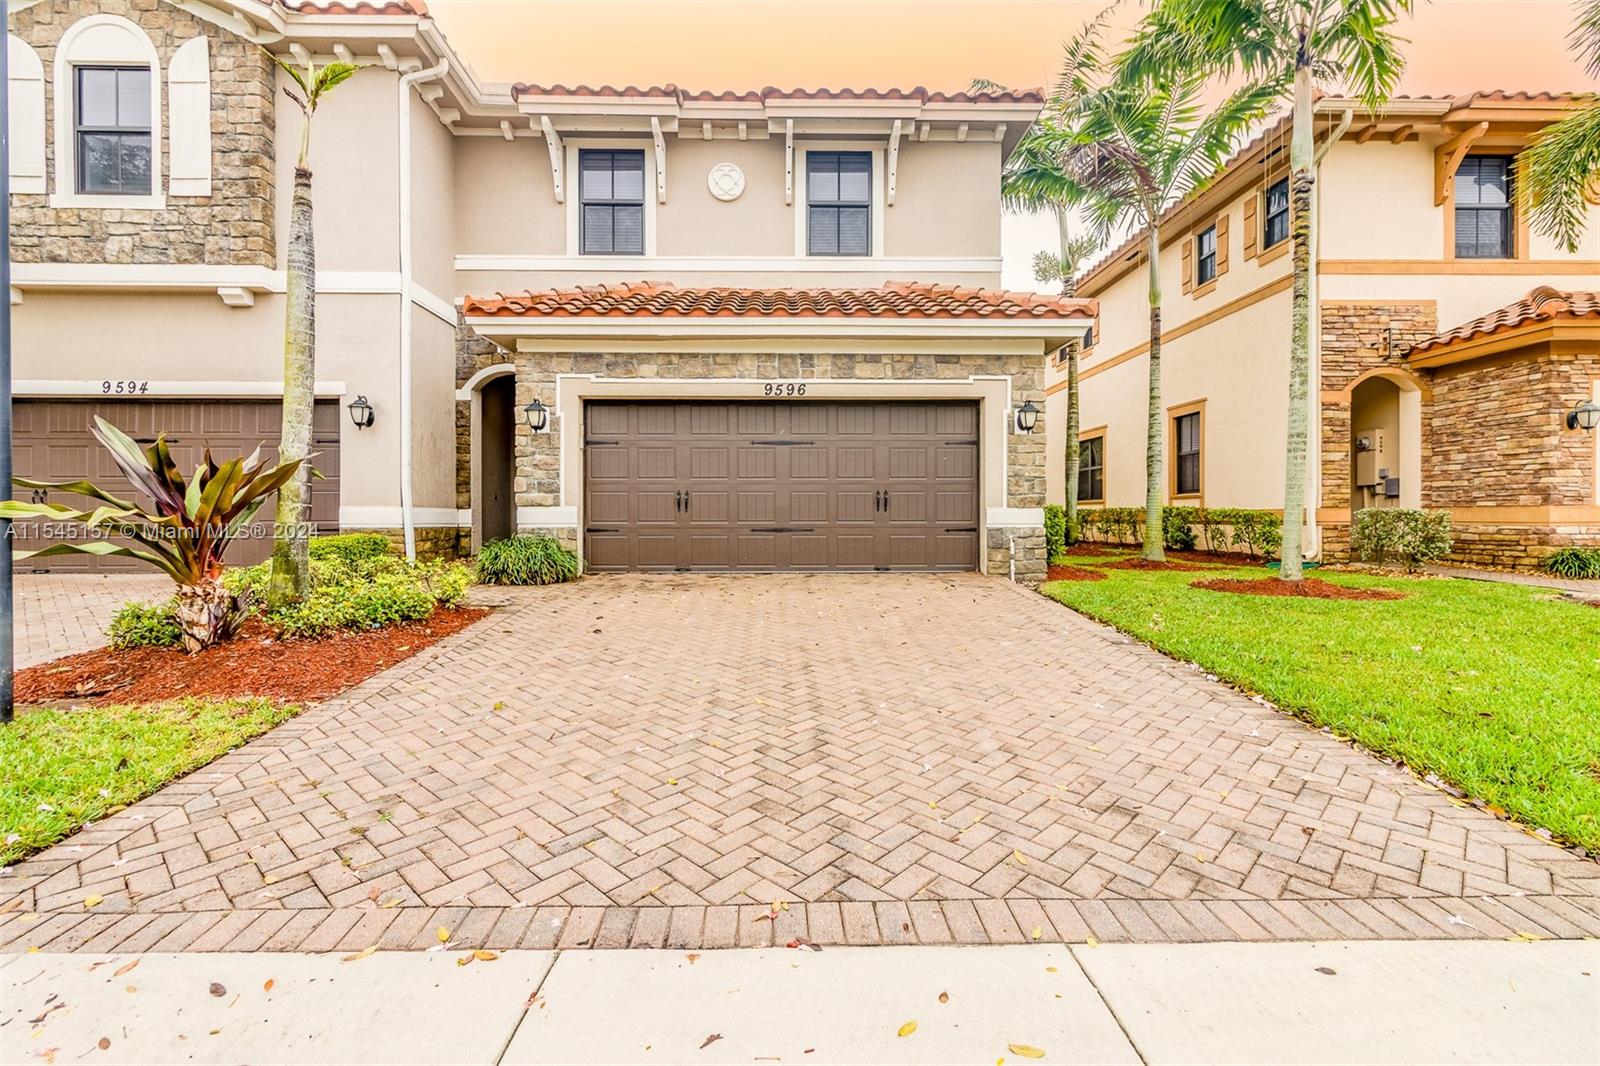 9596 S Town Parc Cir S 5, Parkland, Florida 33076, 3 Bedrooms Bedrooms, ,2 BathroomsBathrooms,Residentiallease,For Rent,9596 S Town Parc Cir S 5,A11545157